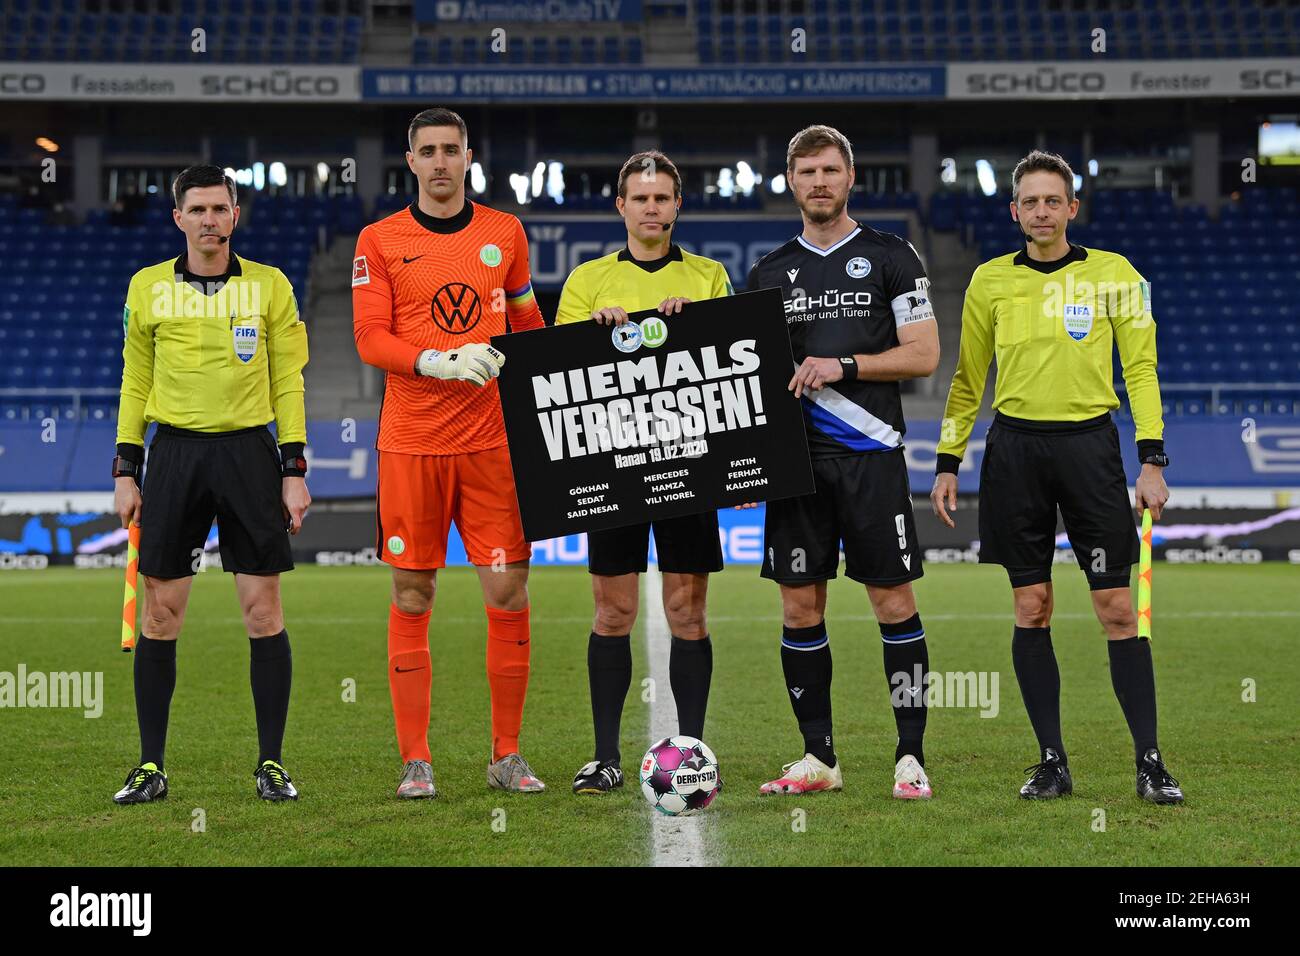 Bielefeld, Germany. 19th Feb, 2021. Football: Bundesliga, Arminia Bielefeld - VfL Wolfsburg, Matchday 22 at Schüco Arena. Stefan Lupp (l-r), assistant referee, Koen Casteels, team captain of VfL Wolfsburg, Felix Brych, referee, Fabian Klos, team captain of Arminia Bielefeld, and Mark Borsch, assistant referee, hold a banner commemorating the racist attack in Hanau a year ago. A right-wing extremist had shot nine people in Hanau on 19 February 2020 for racist motives. Subsequently, the man had shot his mother and then himself. The act caused worldwide horror. Credit: H/dpa/Alamy Live News Stock Photo